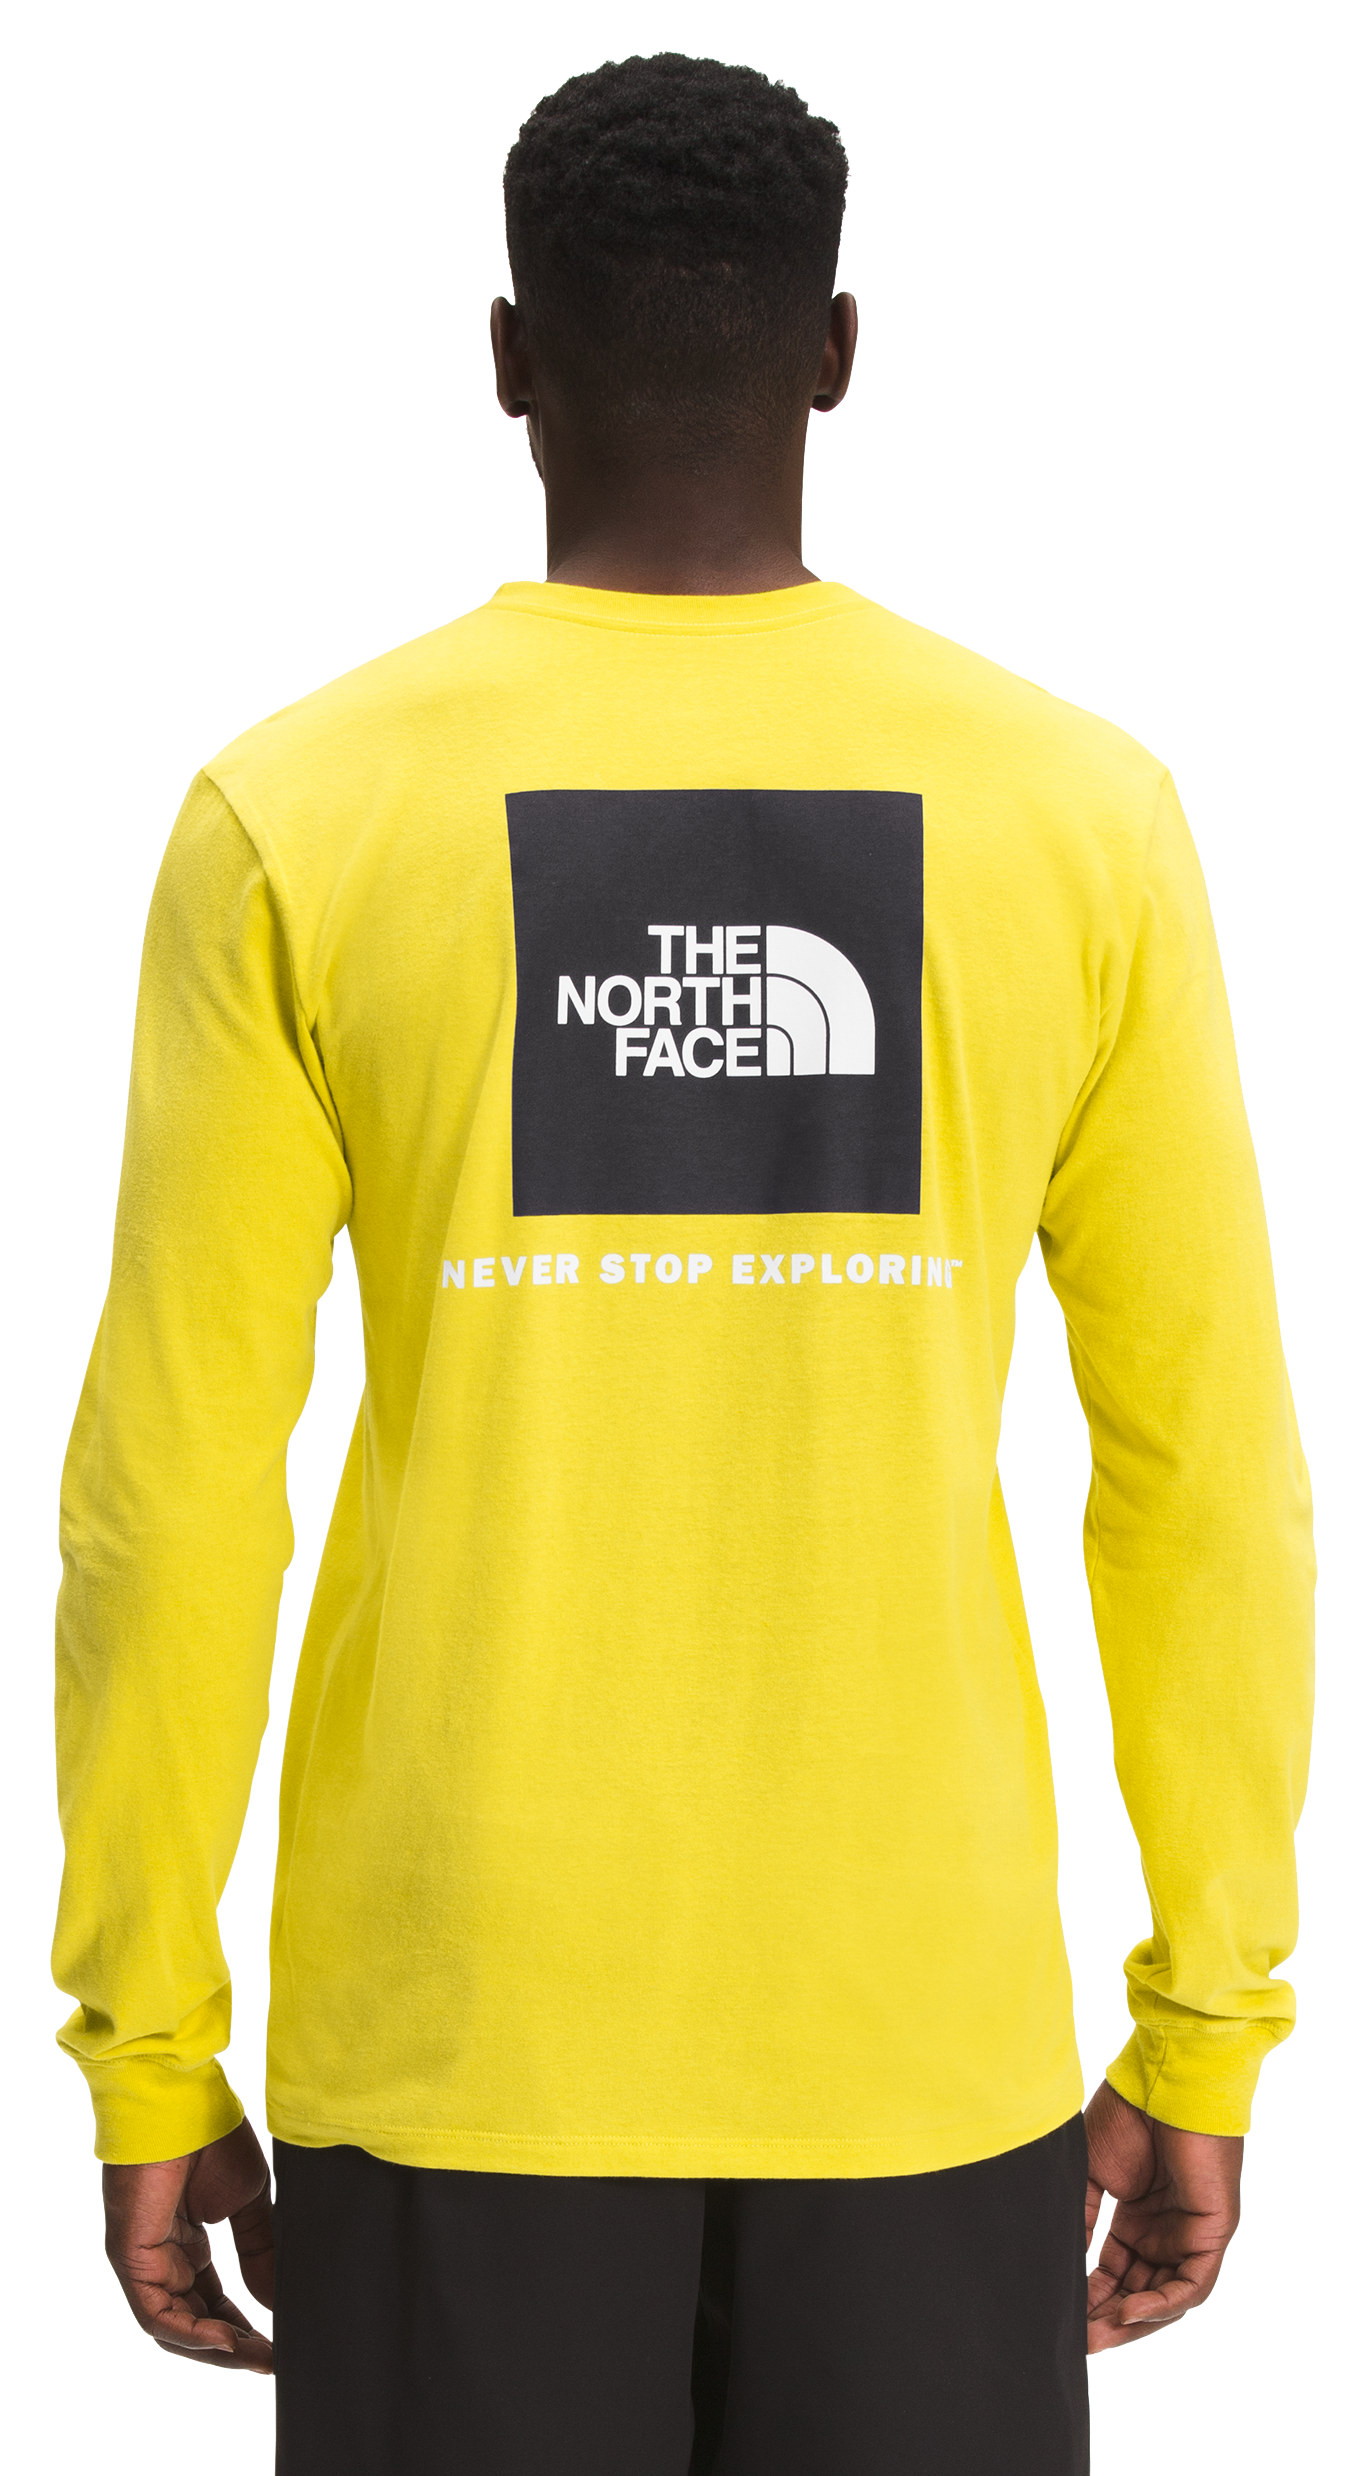 The North Face Box NSE Long-Sleeve Shirt for Men - Acid Yellow/TNF Black - S